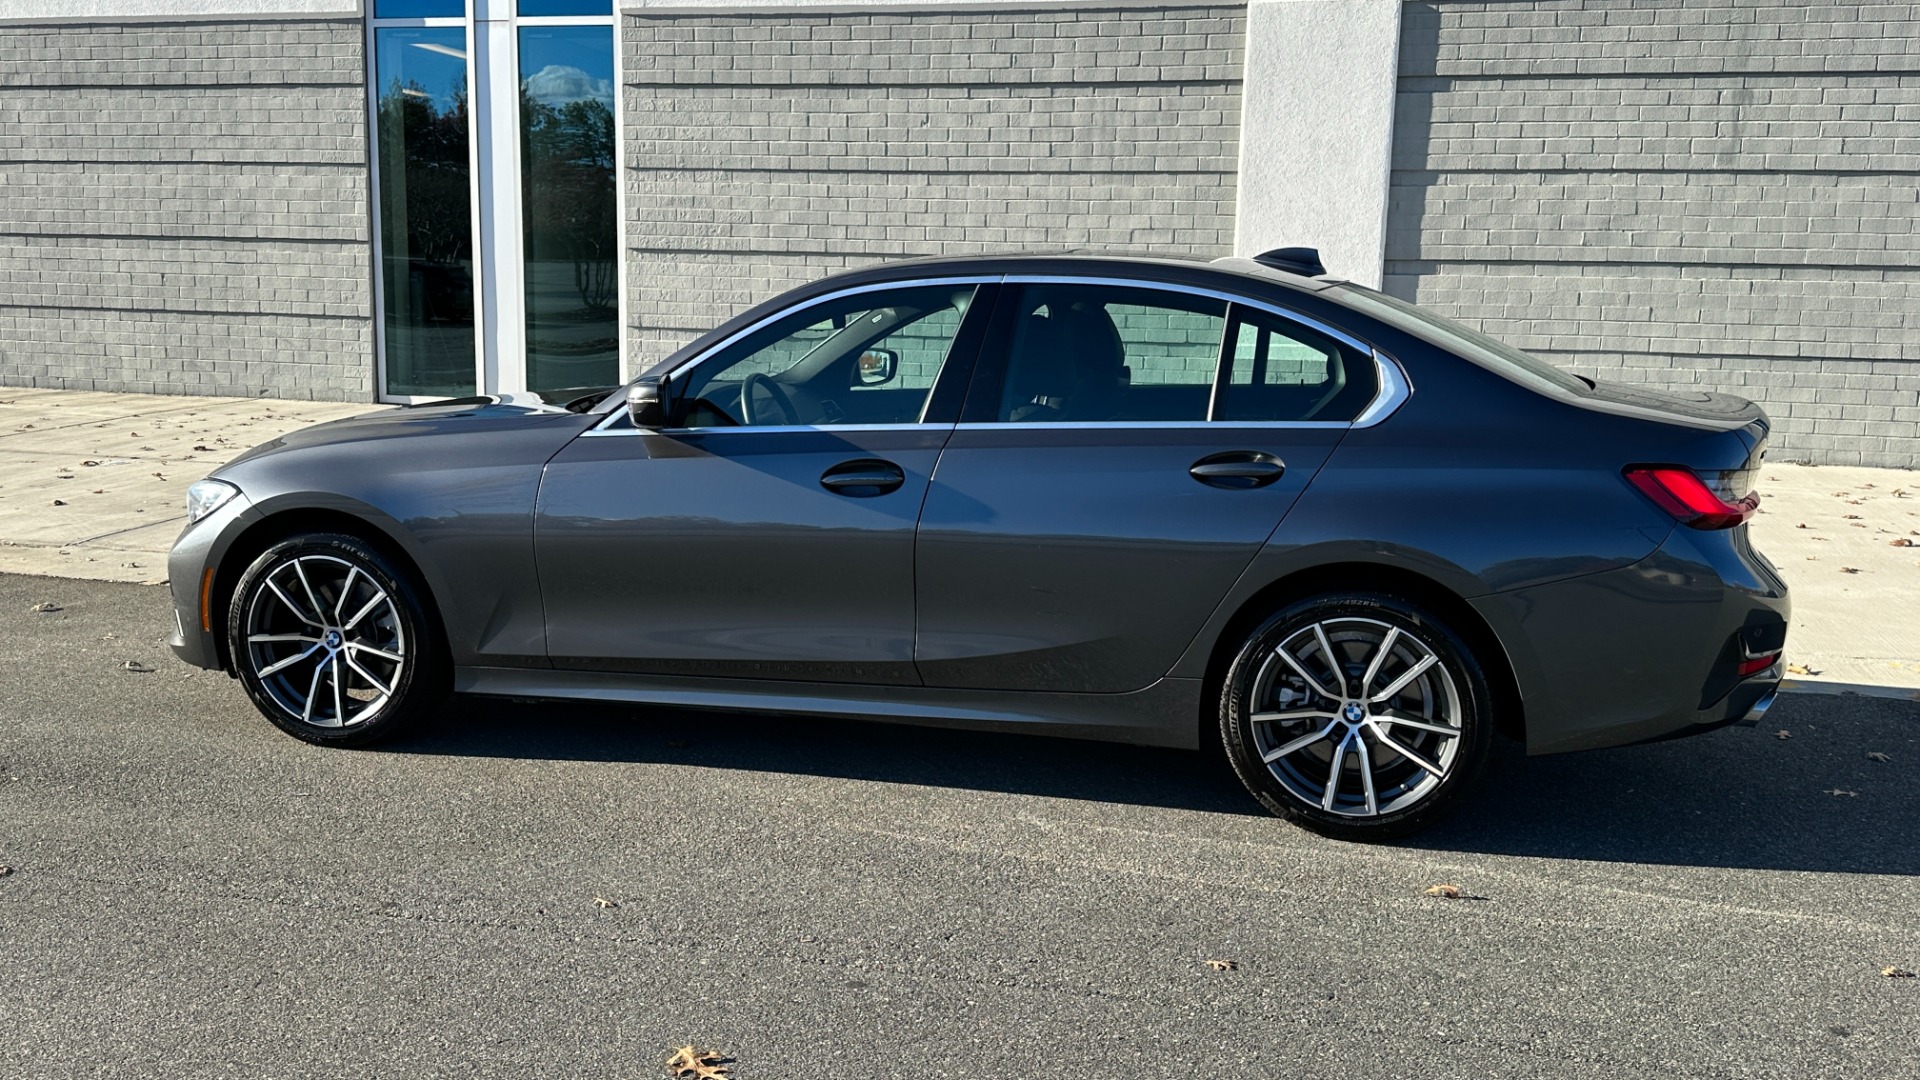 Used 2020 BMW 3 Series 330i xDRIVE / CONVENIENCE / HEATED SEATS / AMBIENT LIGHTING / REMOTE START for sale $35,995 at Formula Imports in Charlotte NC 28227 6